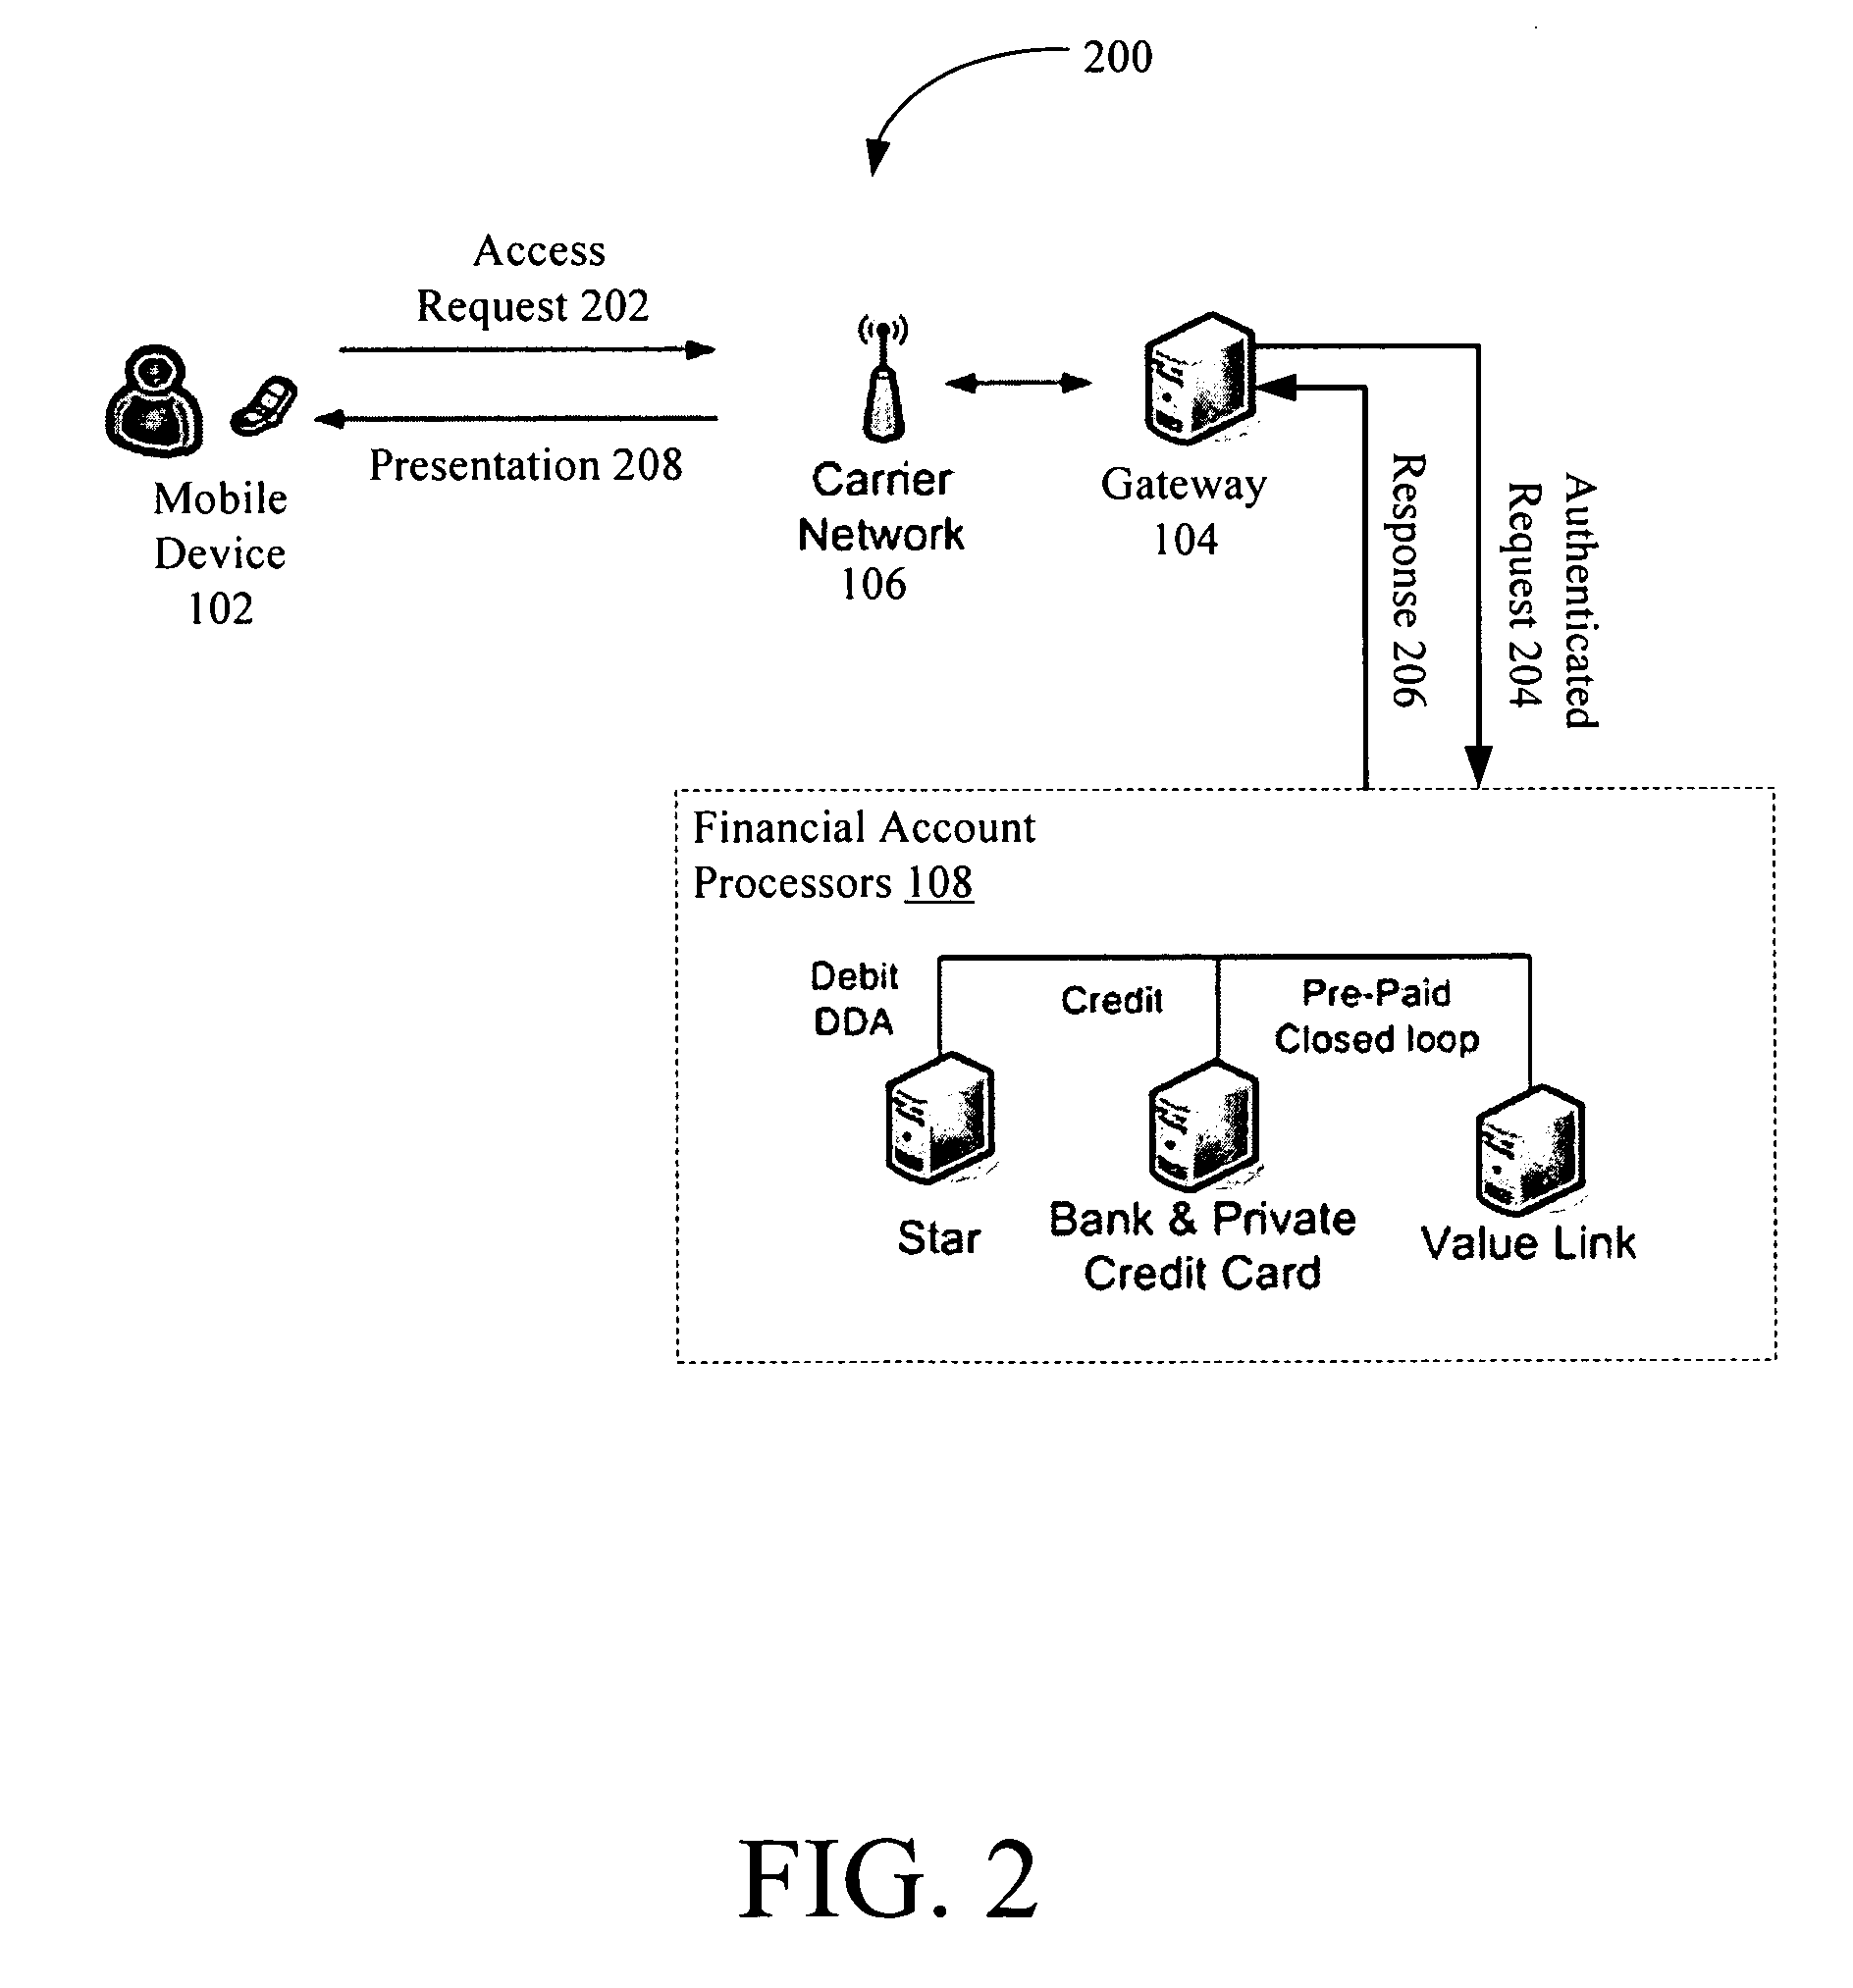 Systems and methods for financial account access for a mobile device via a gateway